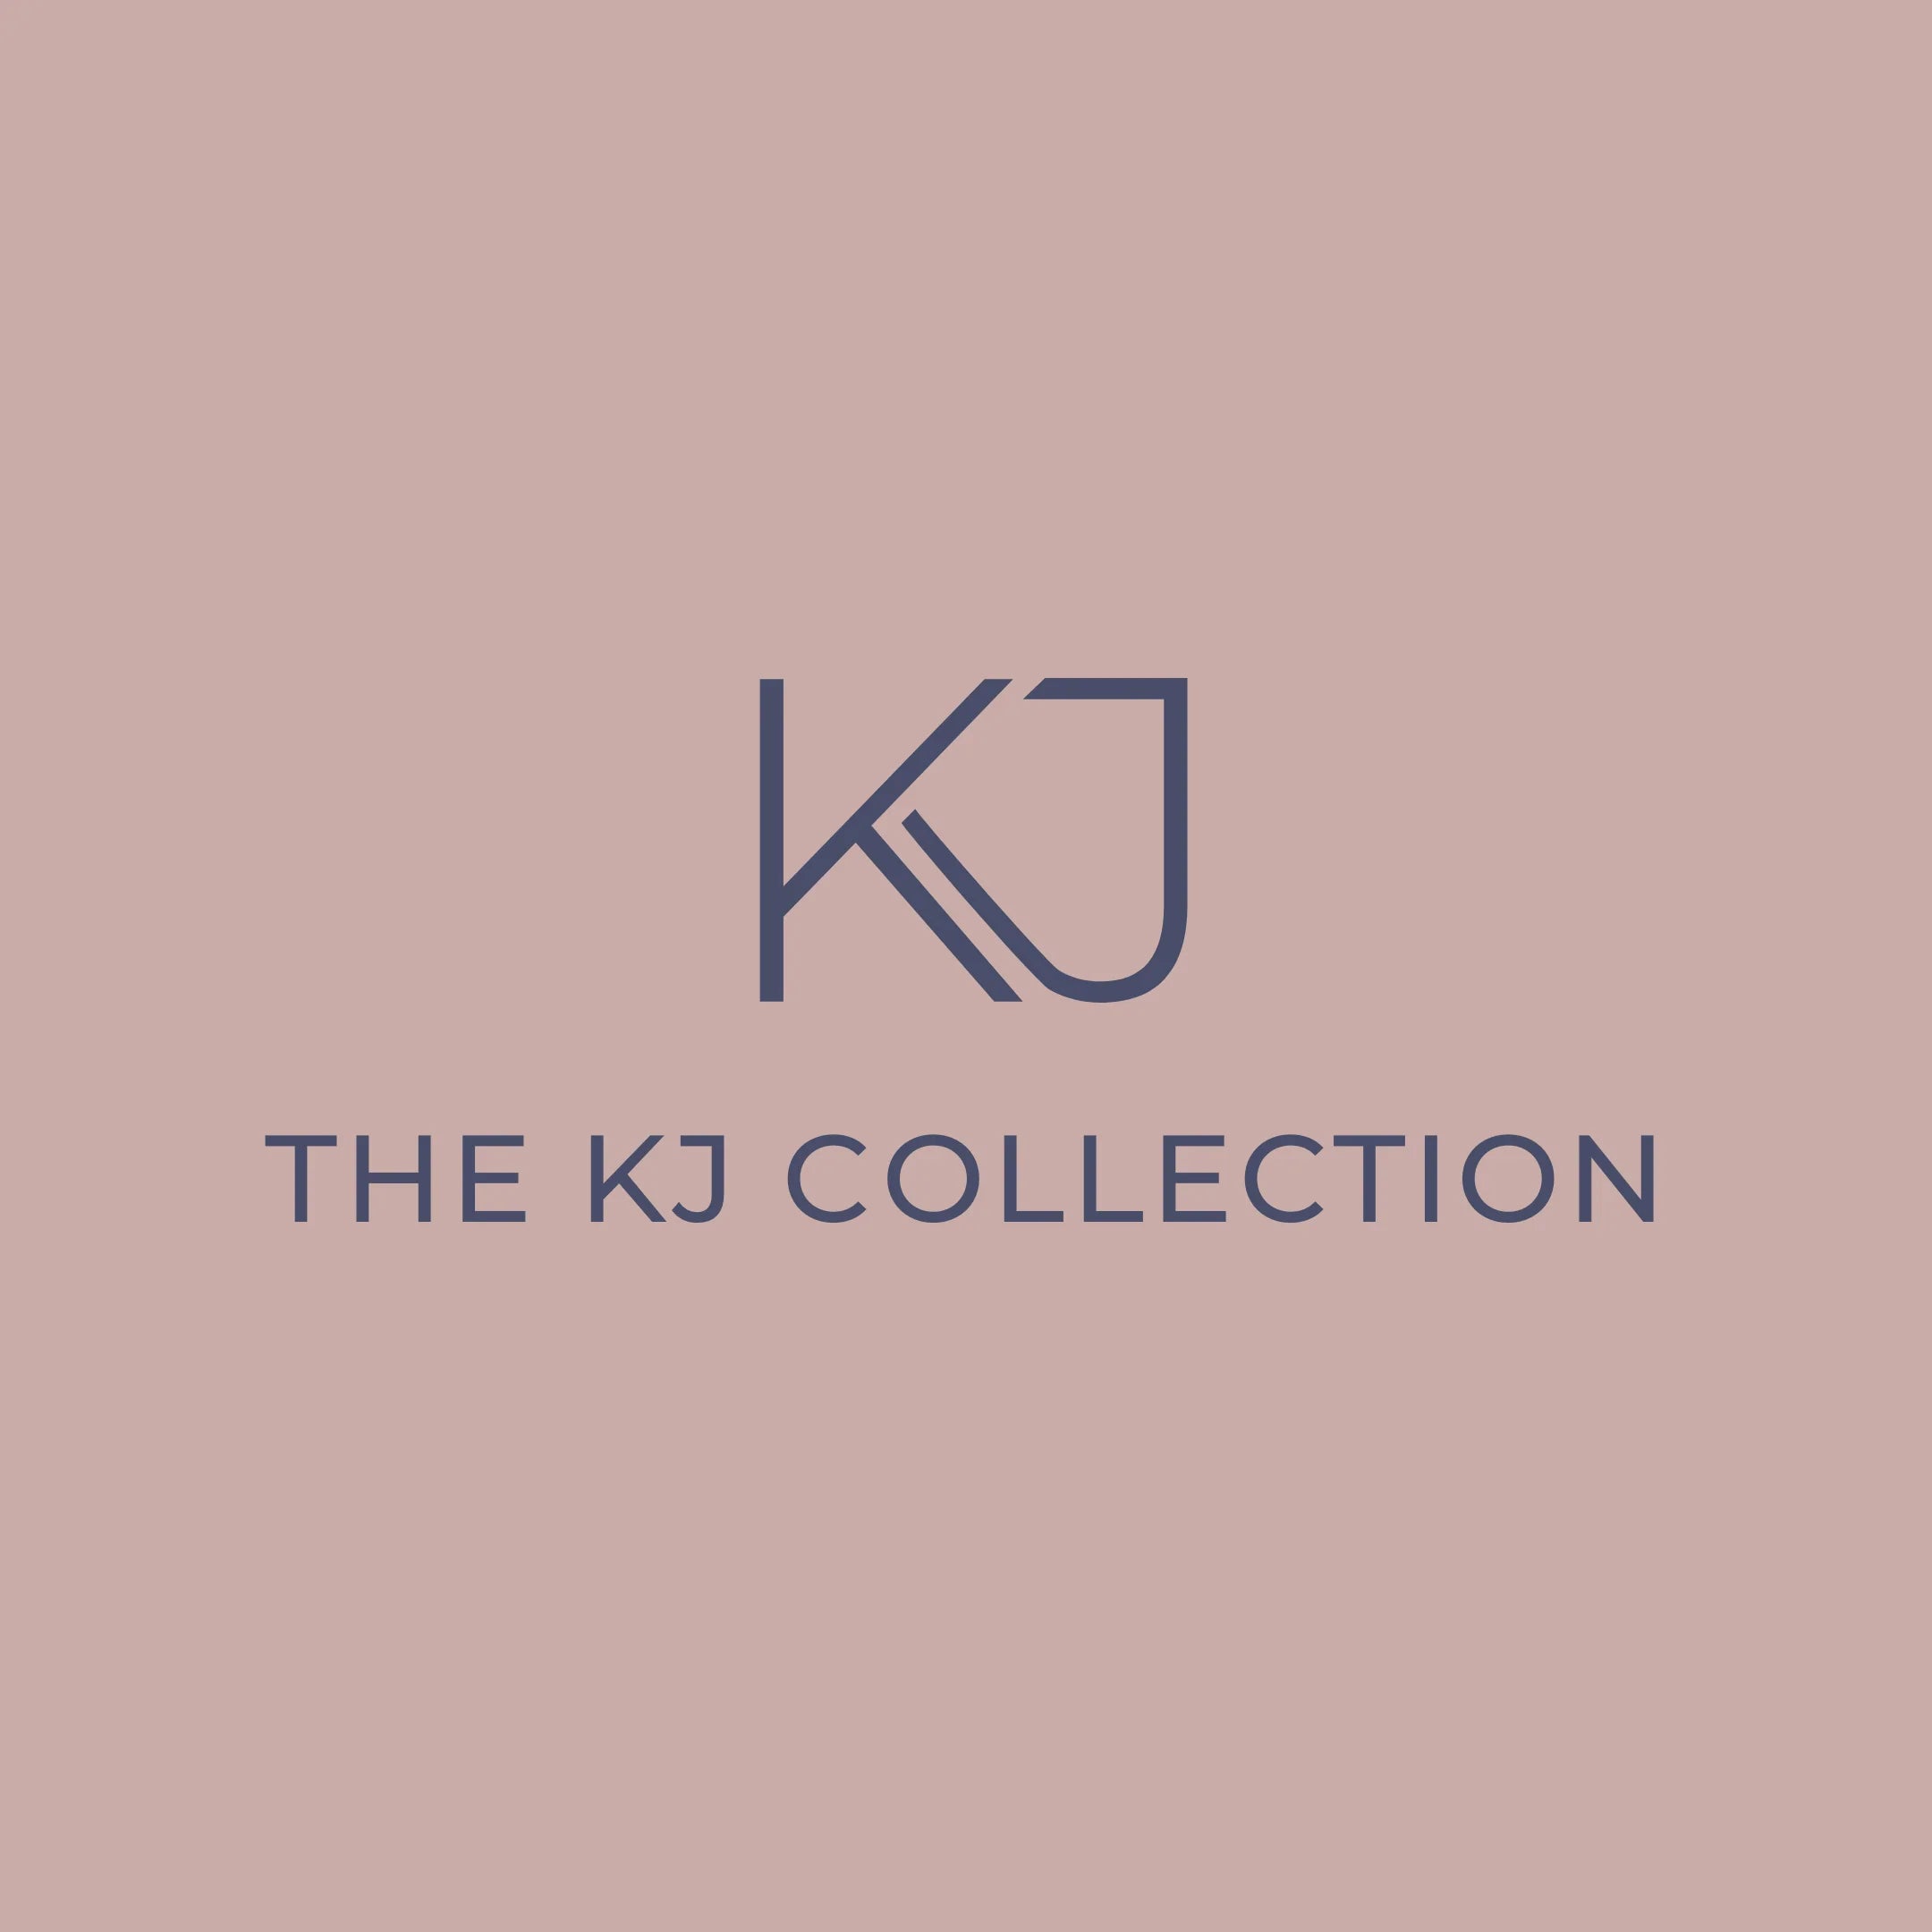 Empowering Authenticity: The KJ Collection's Dedication to Artisanal Craftsmanship and Small Businesses